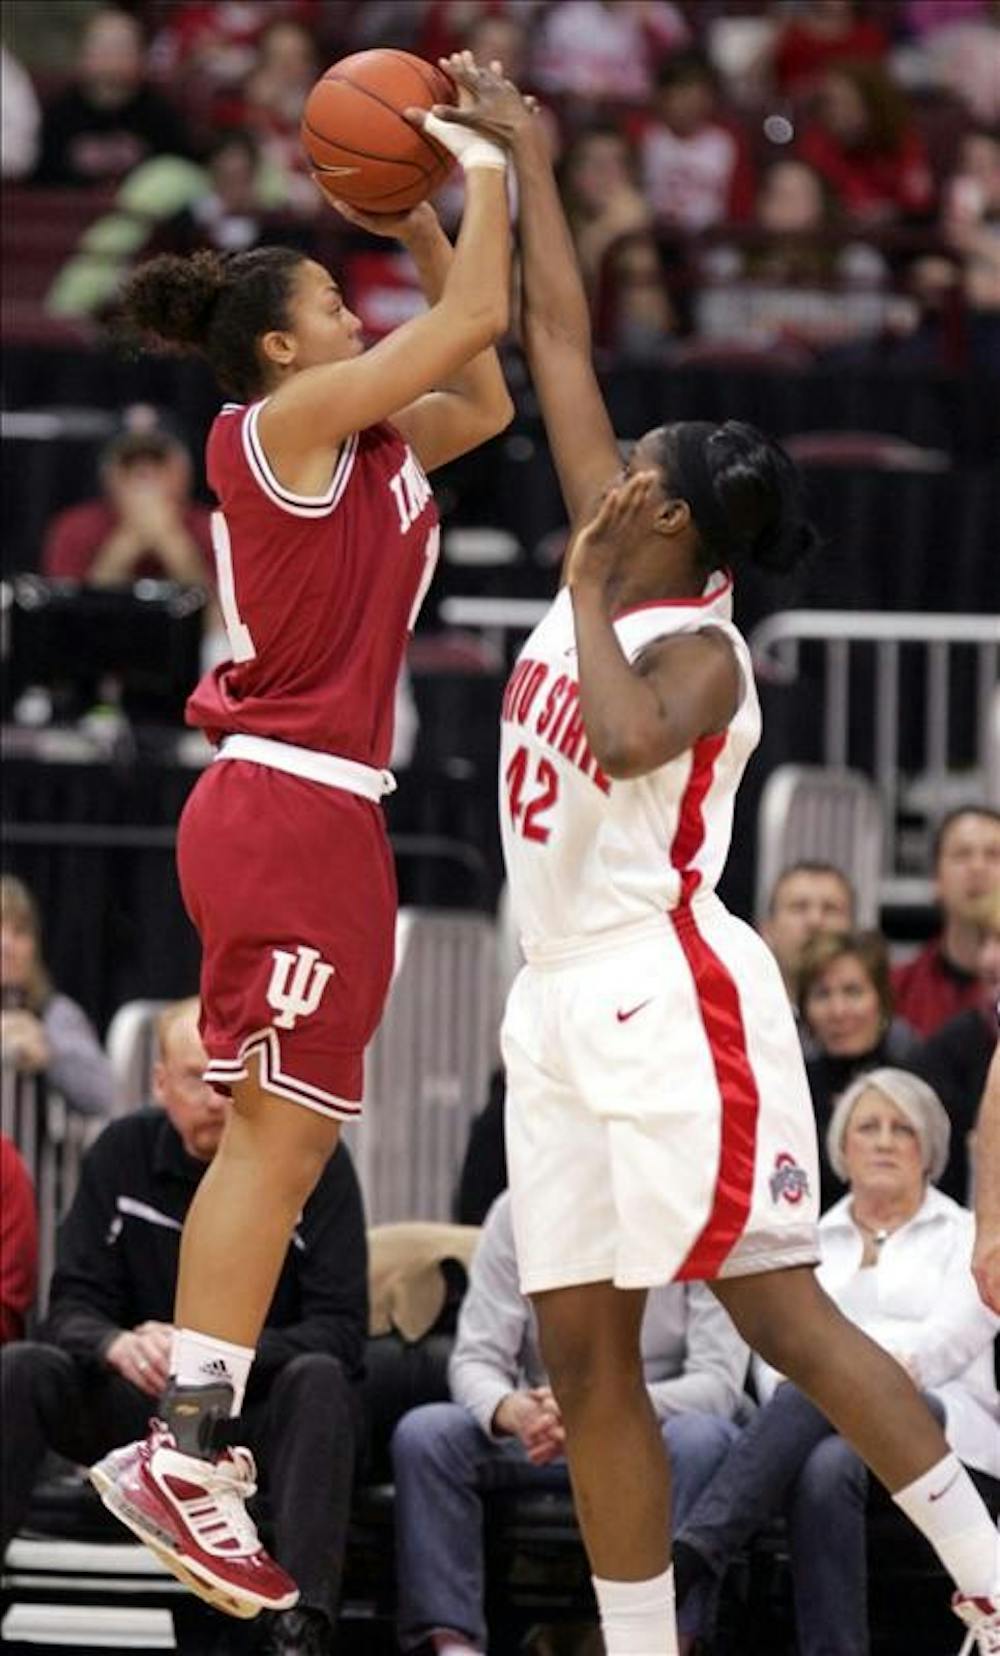 Indiana's Whitney Thomas goes up for a shot over Ohio State's Jantel Lavender during the first half Sunday at Ohio State University in Columbus, Ohio.